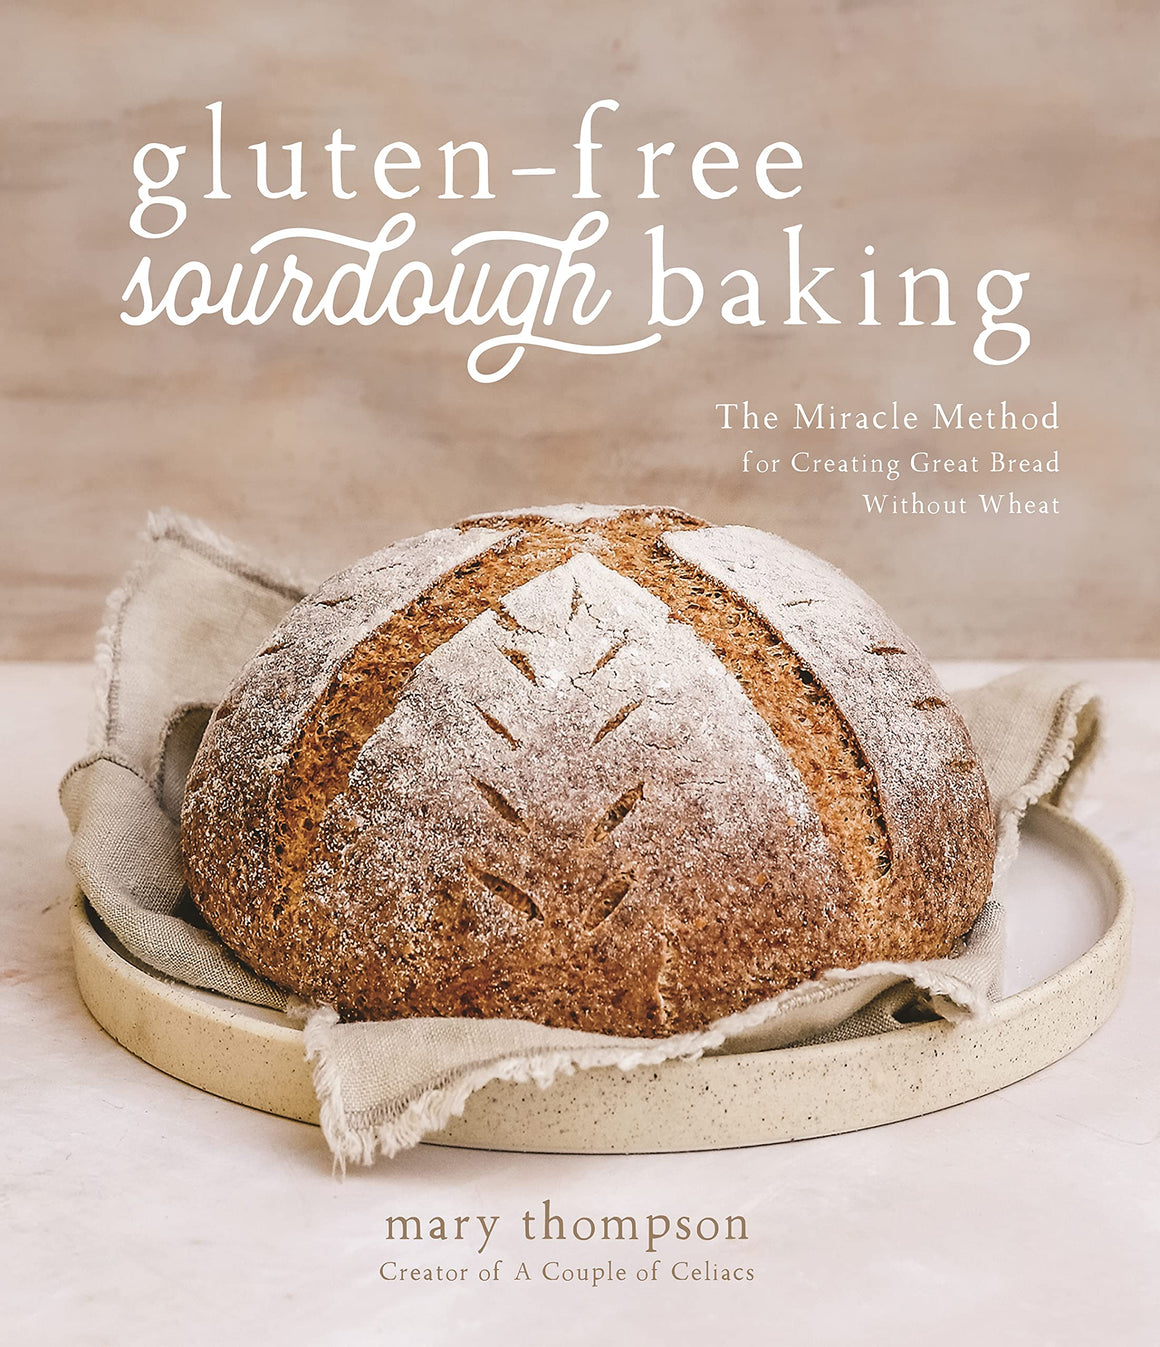 (Baking - Gluten-Free) Mary Thompson. Gluten-Free Sourdough Baking: The Miracle Method for Creating Great Bread Without Wheat.